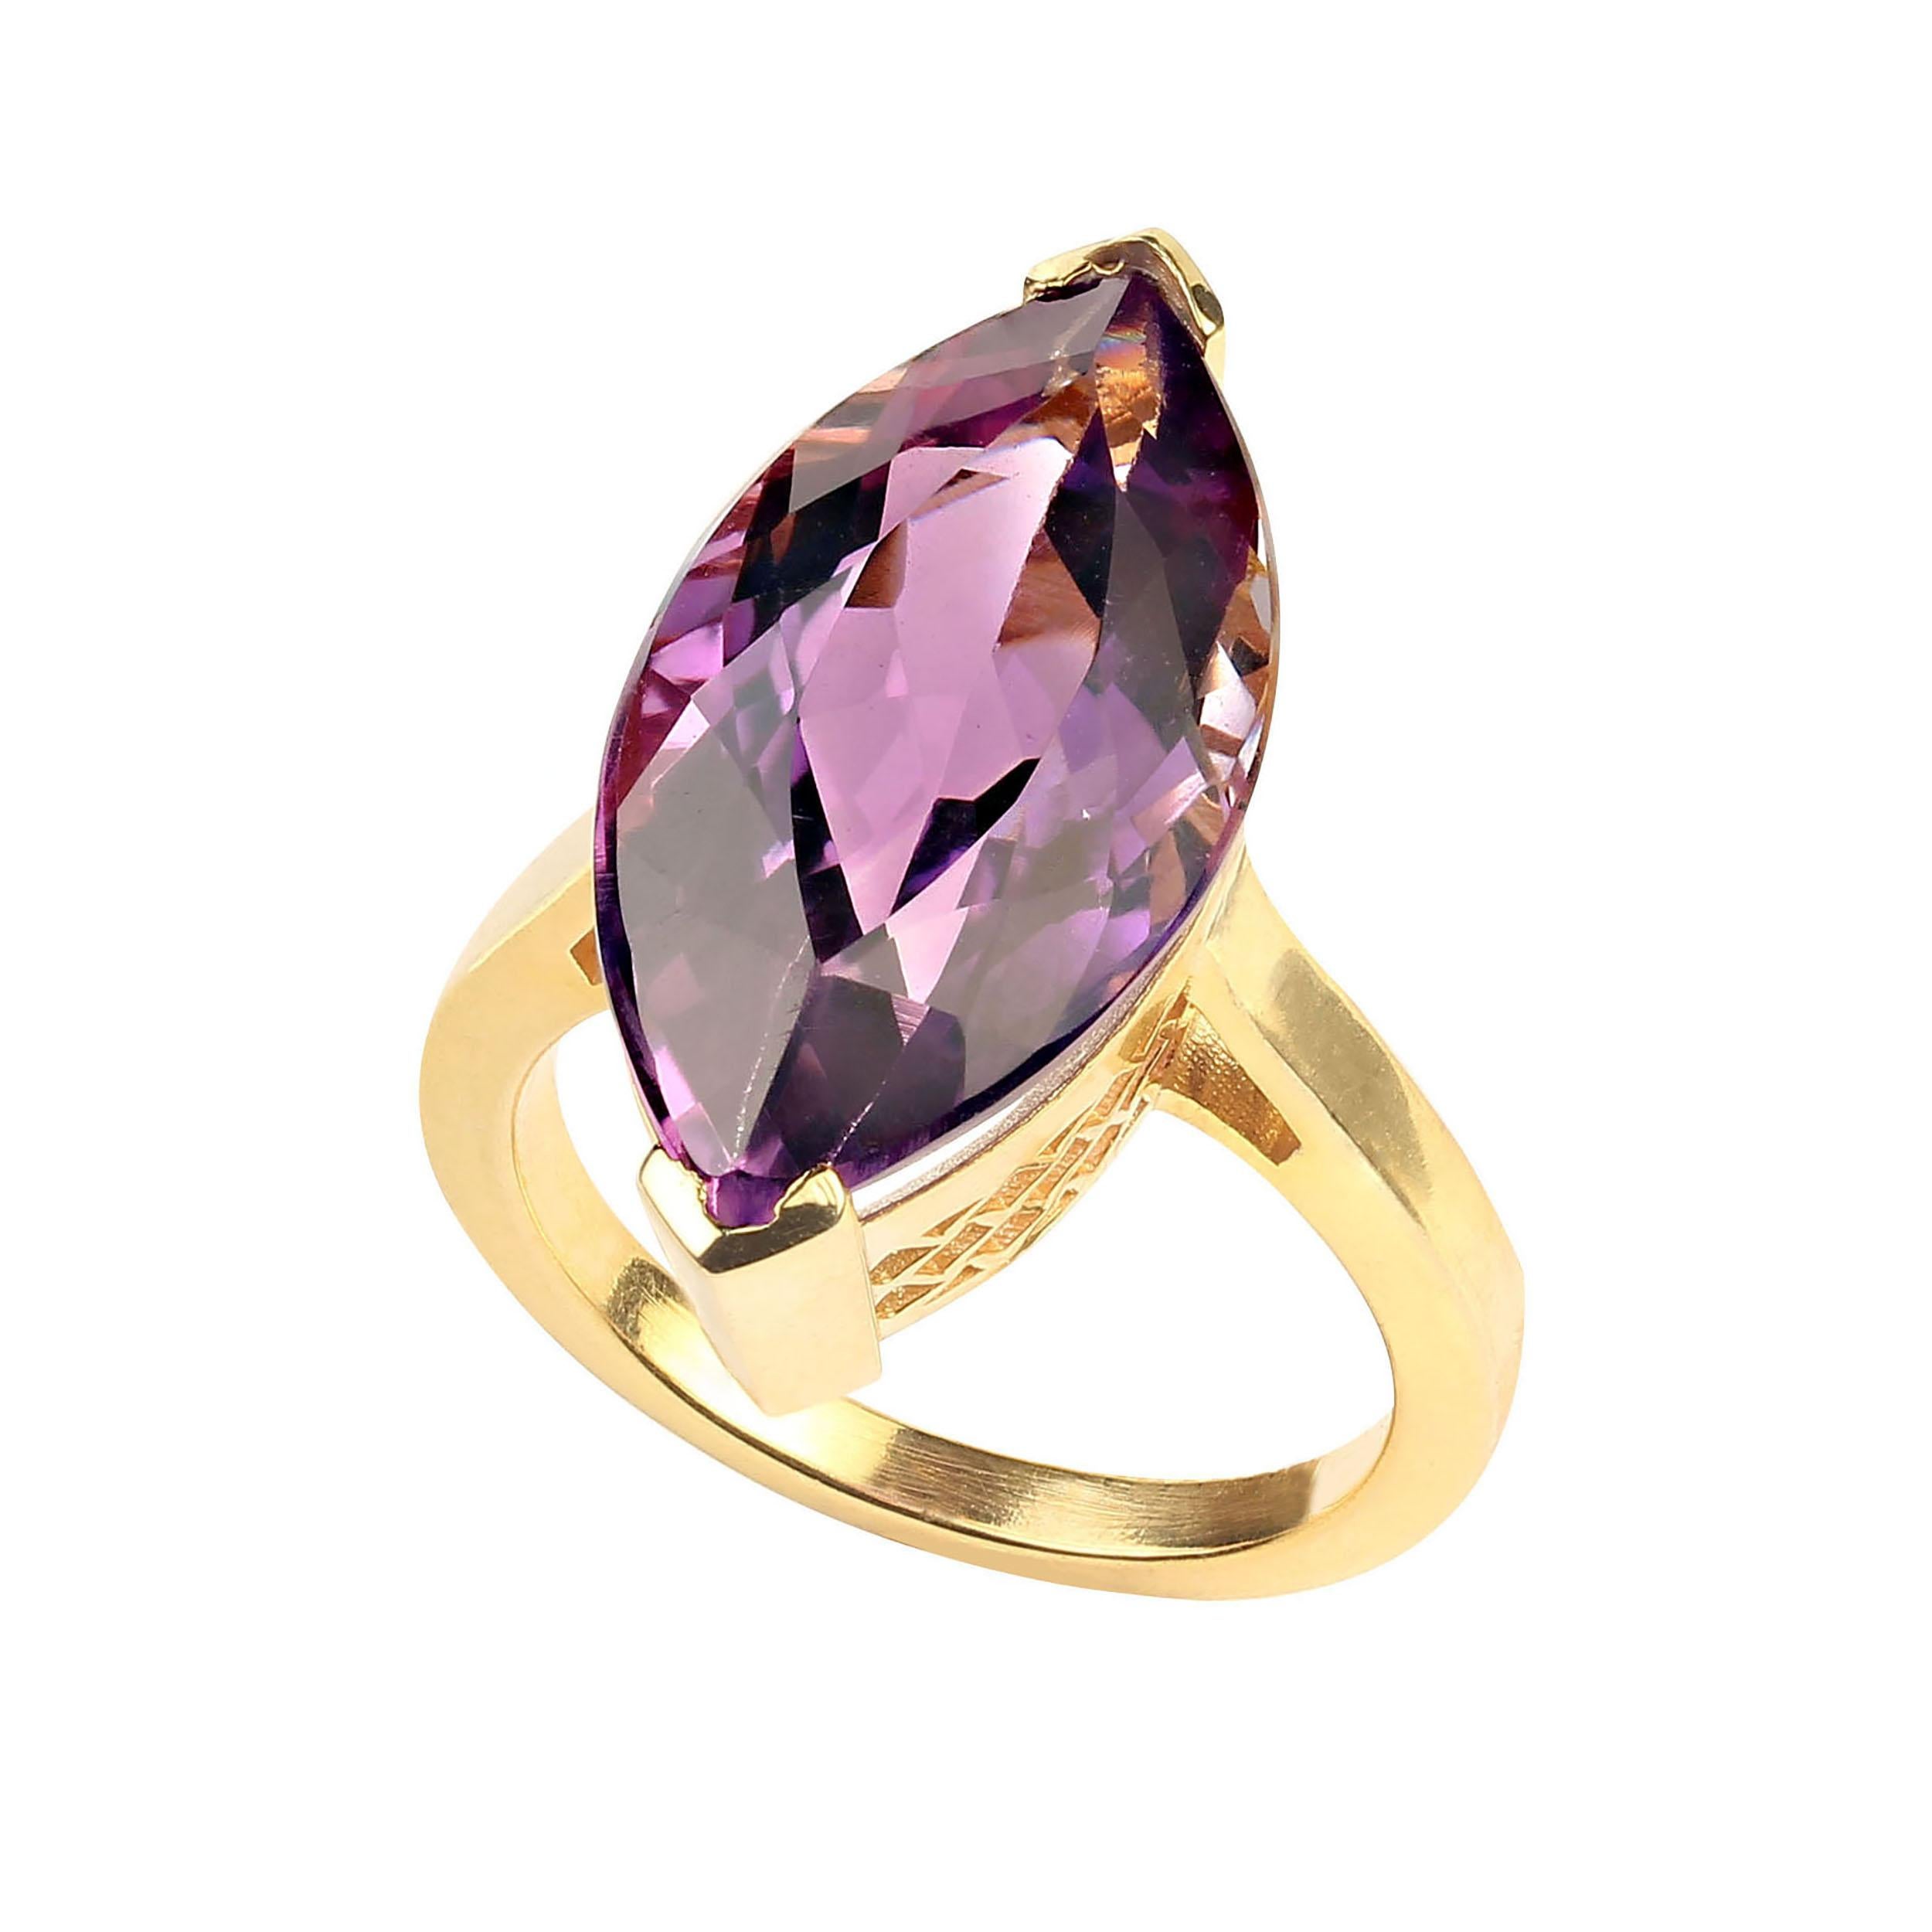 Artisan AJD Marvelous Marquise 13 Carat Amethyst Gold Rhodium Ring February Birthstone! For Sale